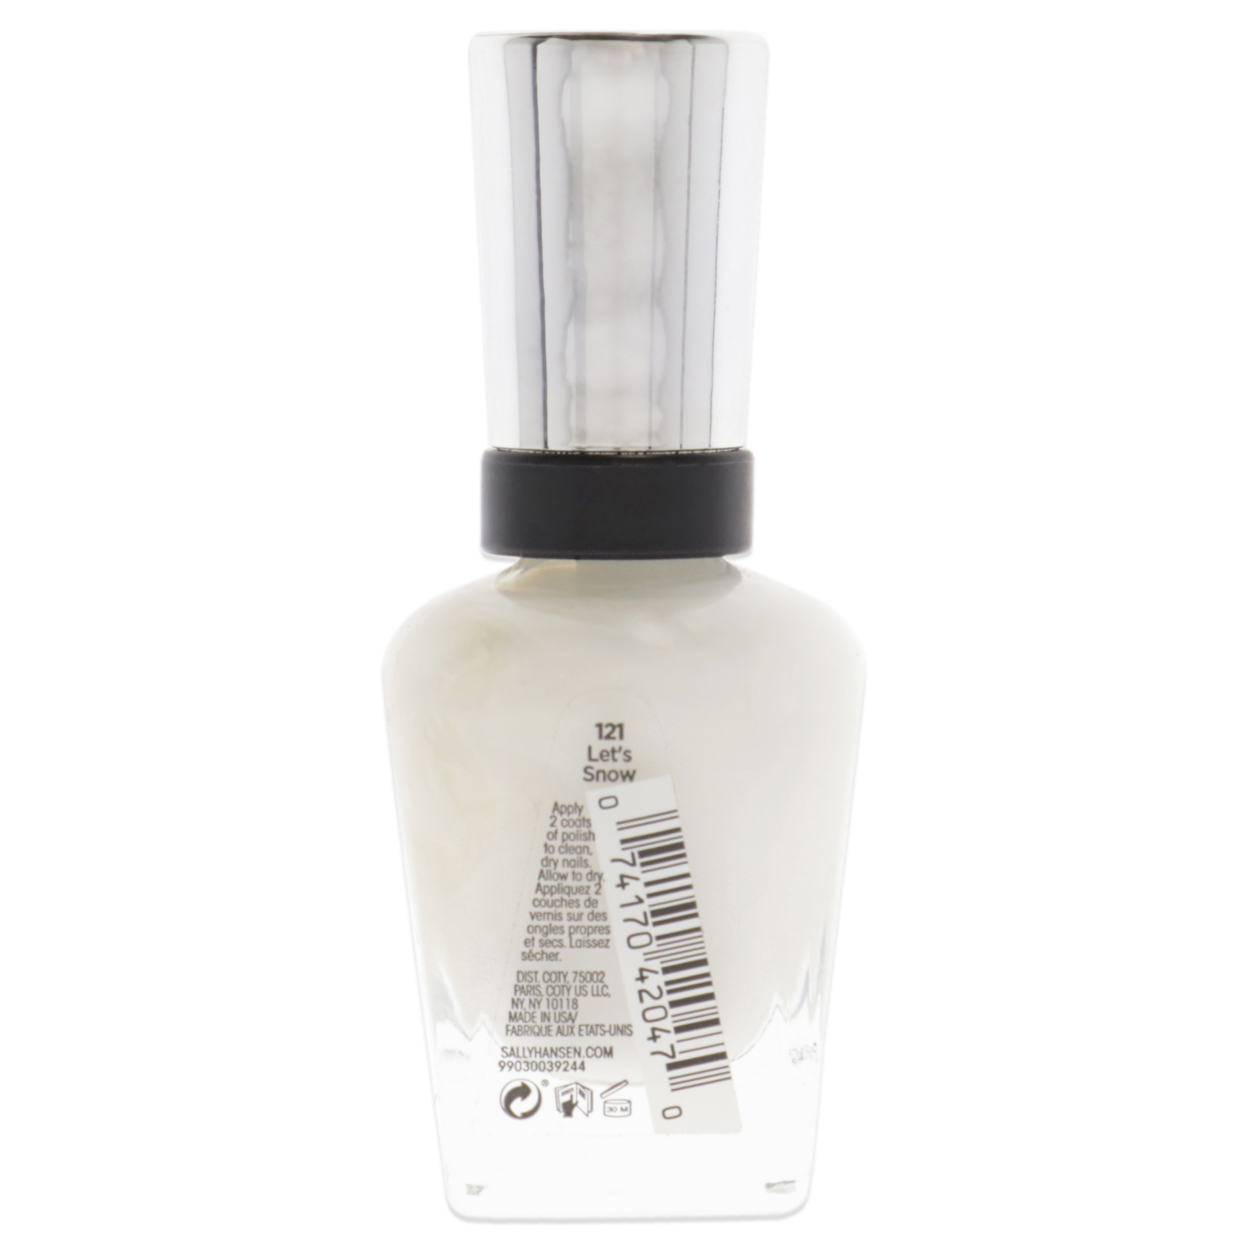 Sally Hansen Complete Salon Manicure Nail Color, Let's Snow - image 3 of 3